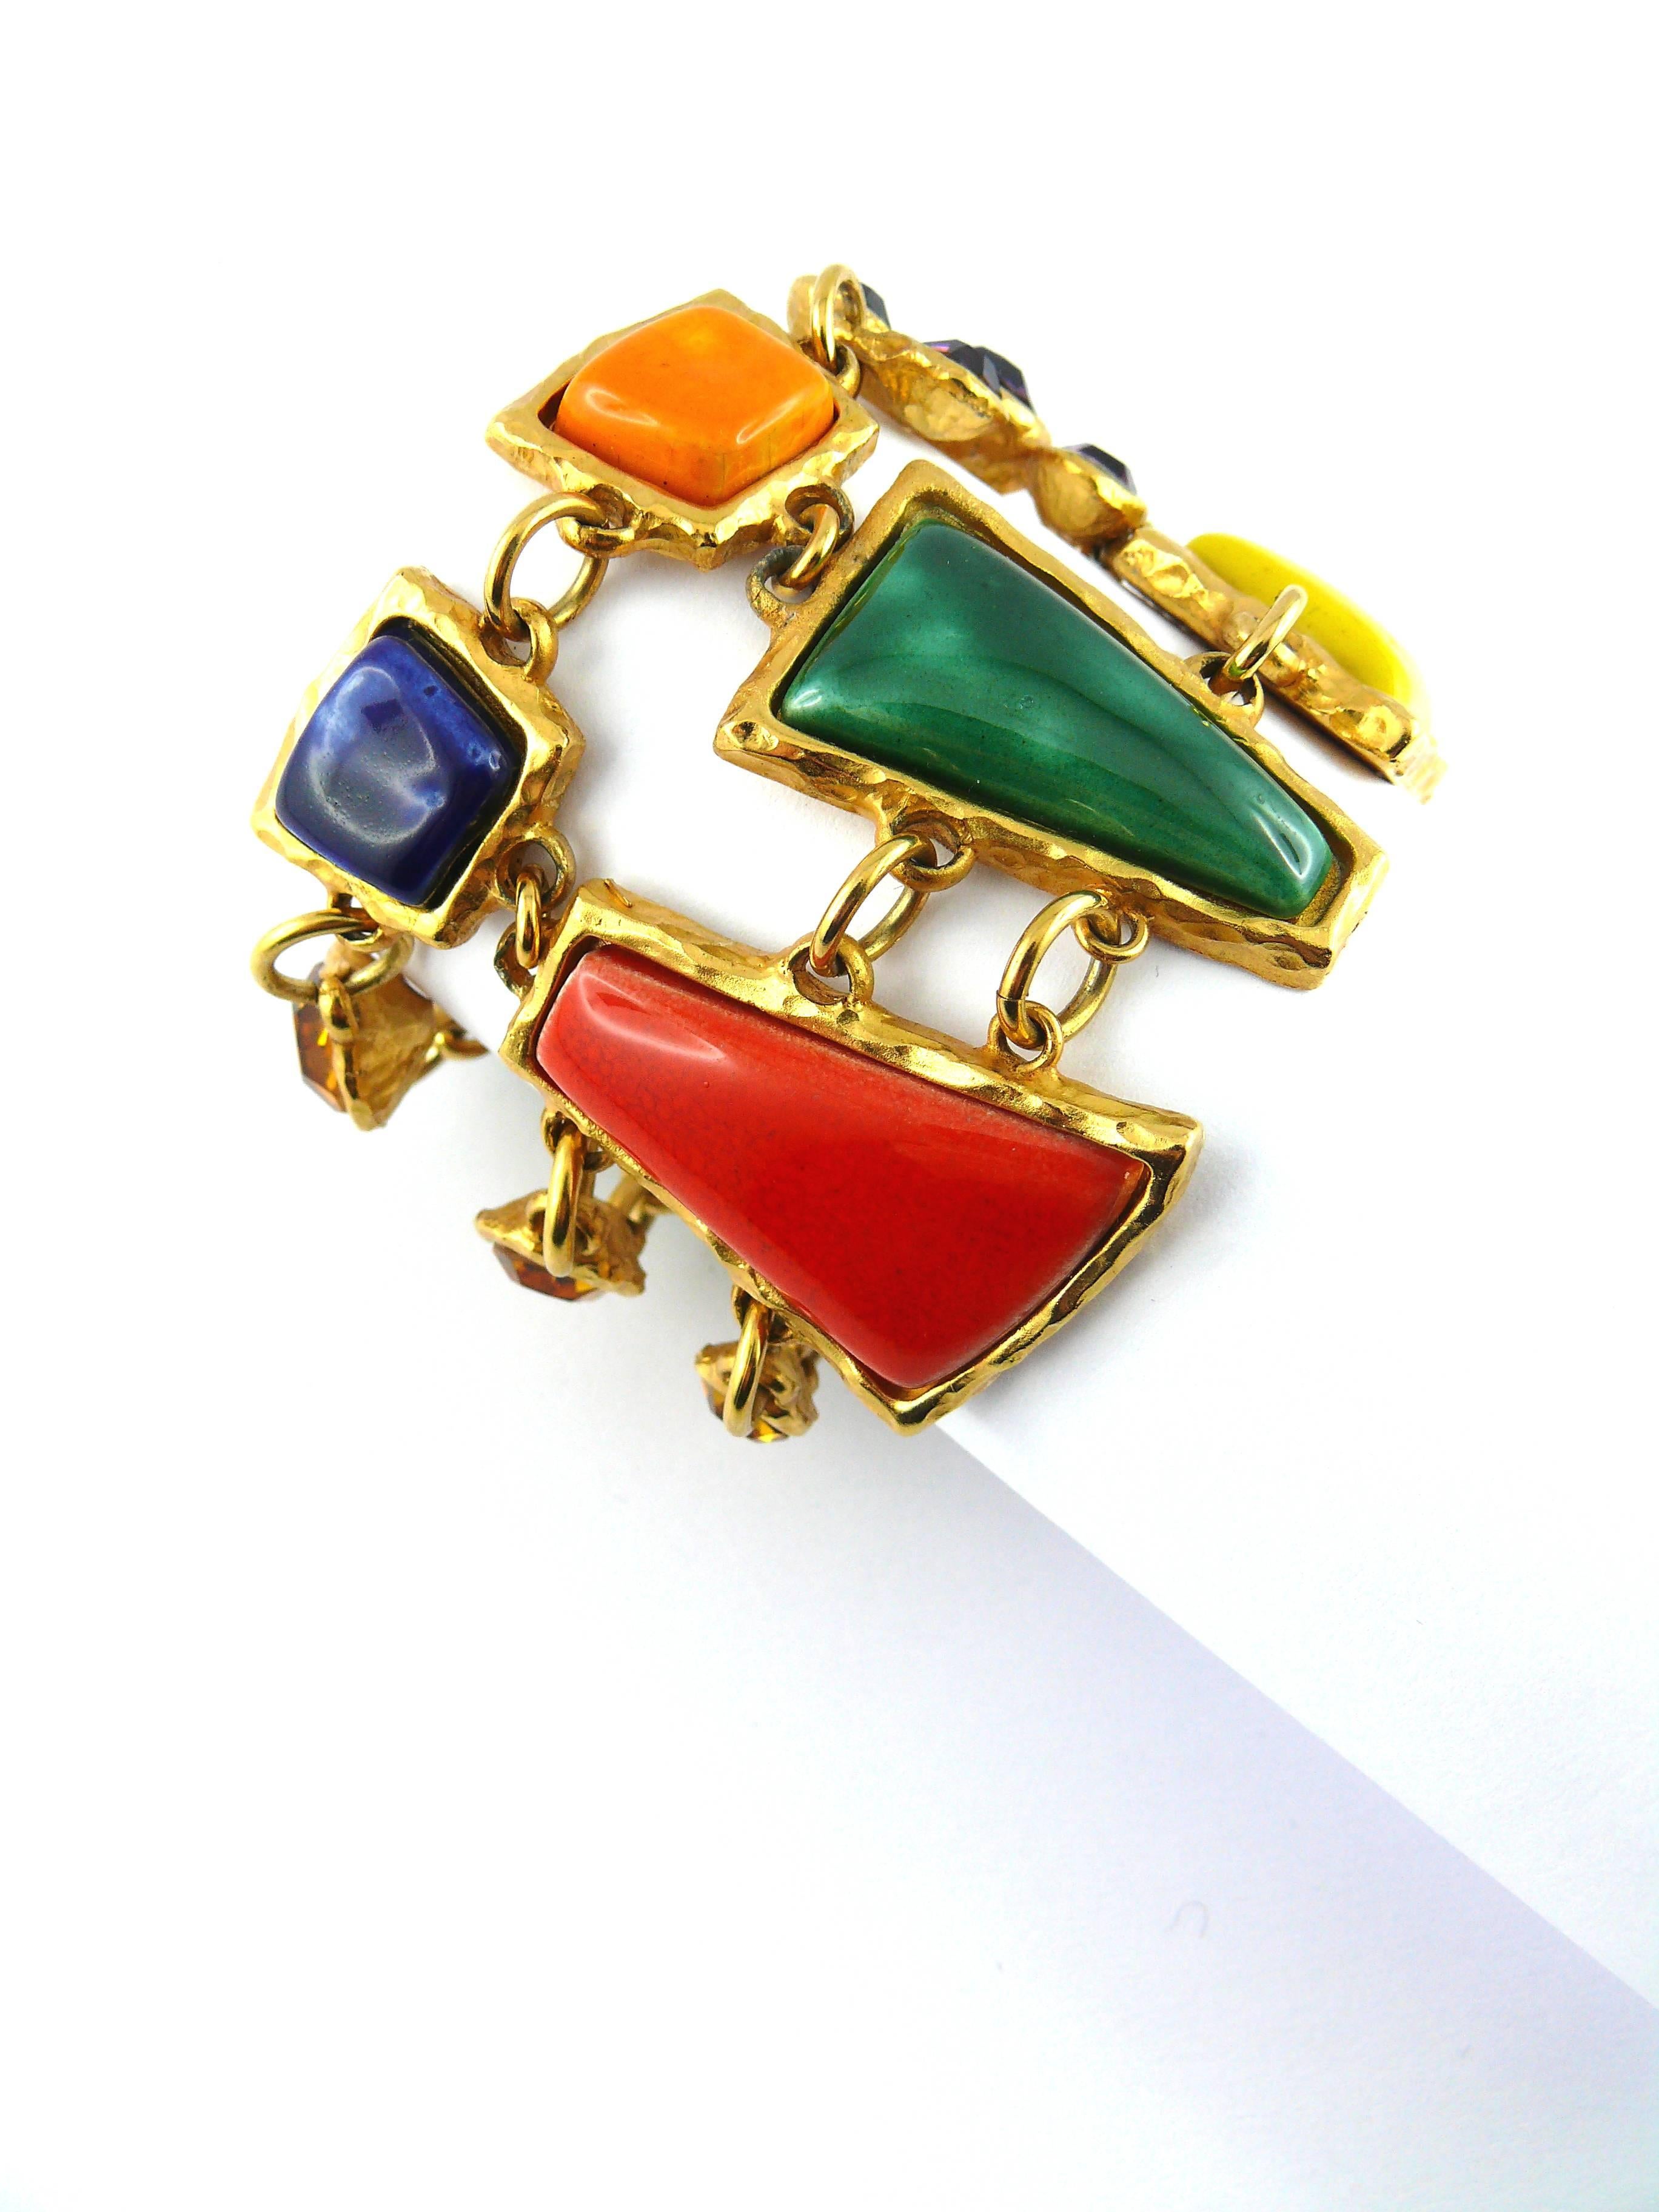 CHRISTIAN LACROIX stunning vintage multicolored ceramic cuff bracelet with rhinestone embellishement;

Hammered gold tone setting.

Marked CHRISTIAN LACROIX CL Made in France.

JEWELRY CONDITION CHART
- New or never worn : item is in pristine